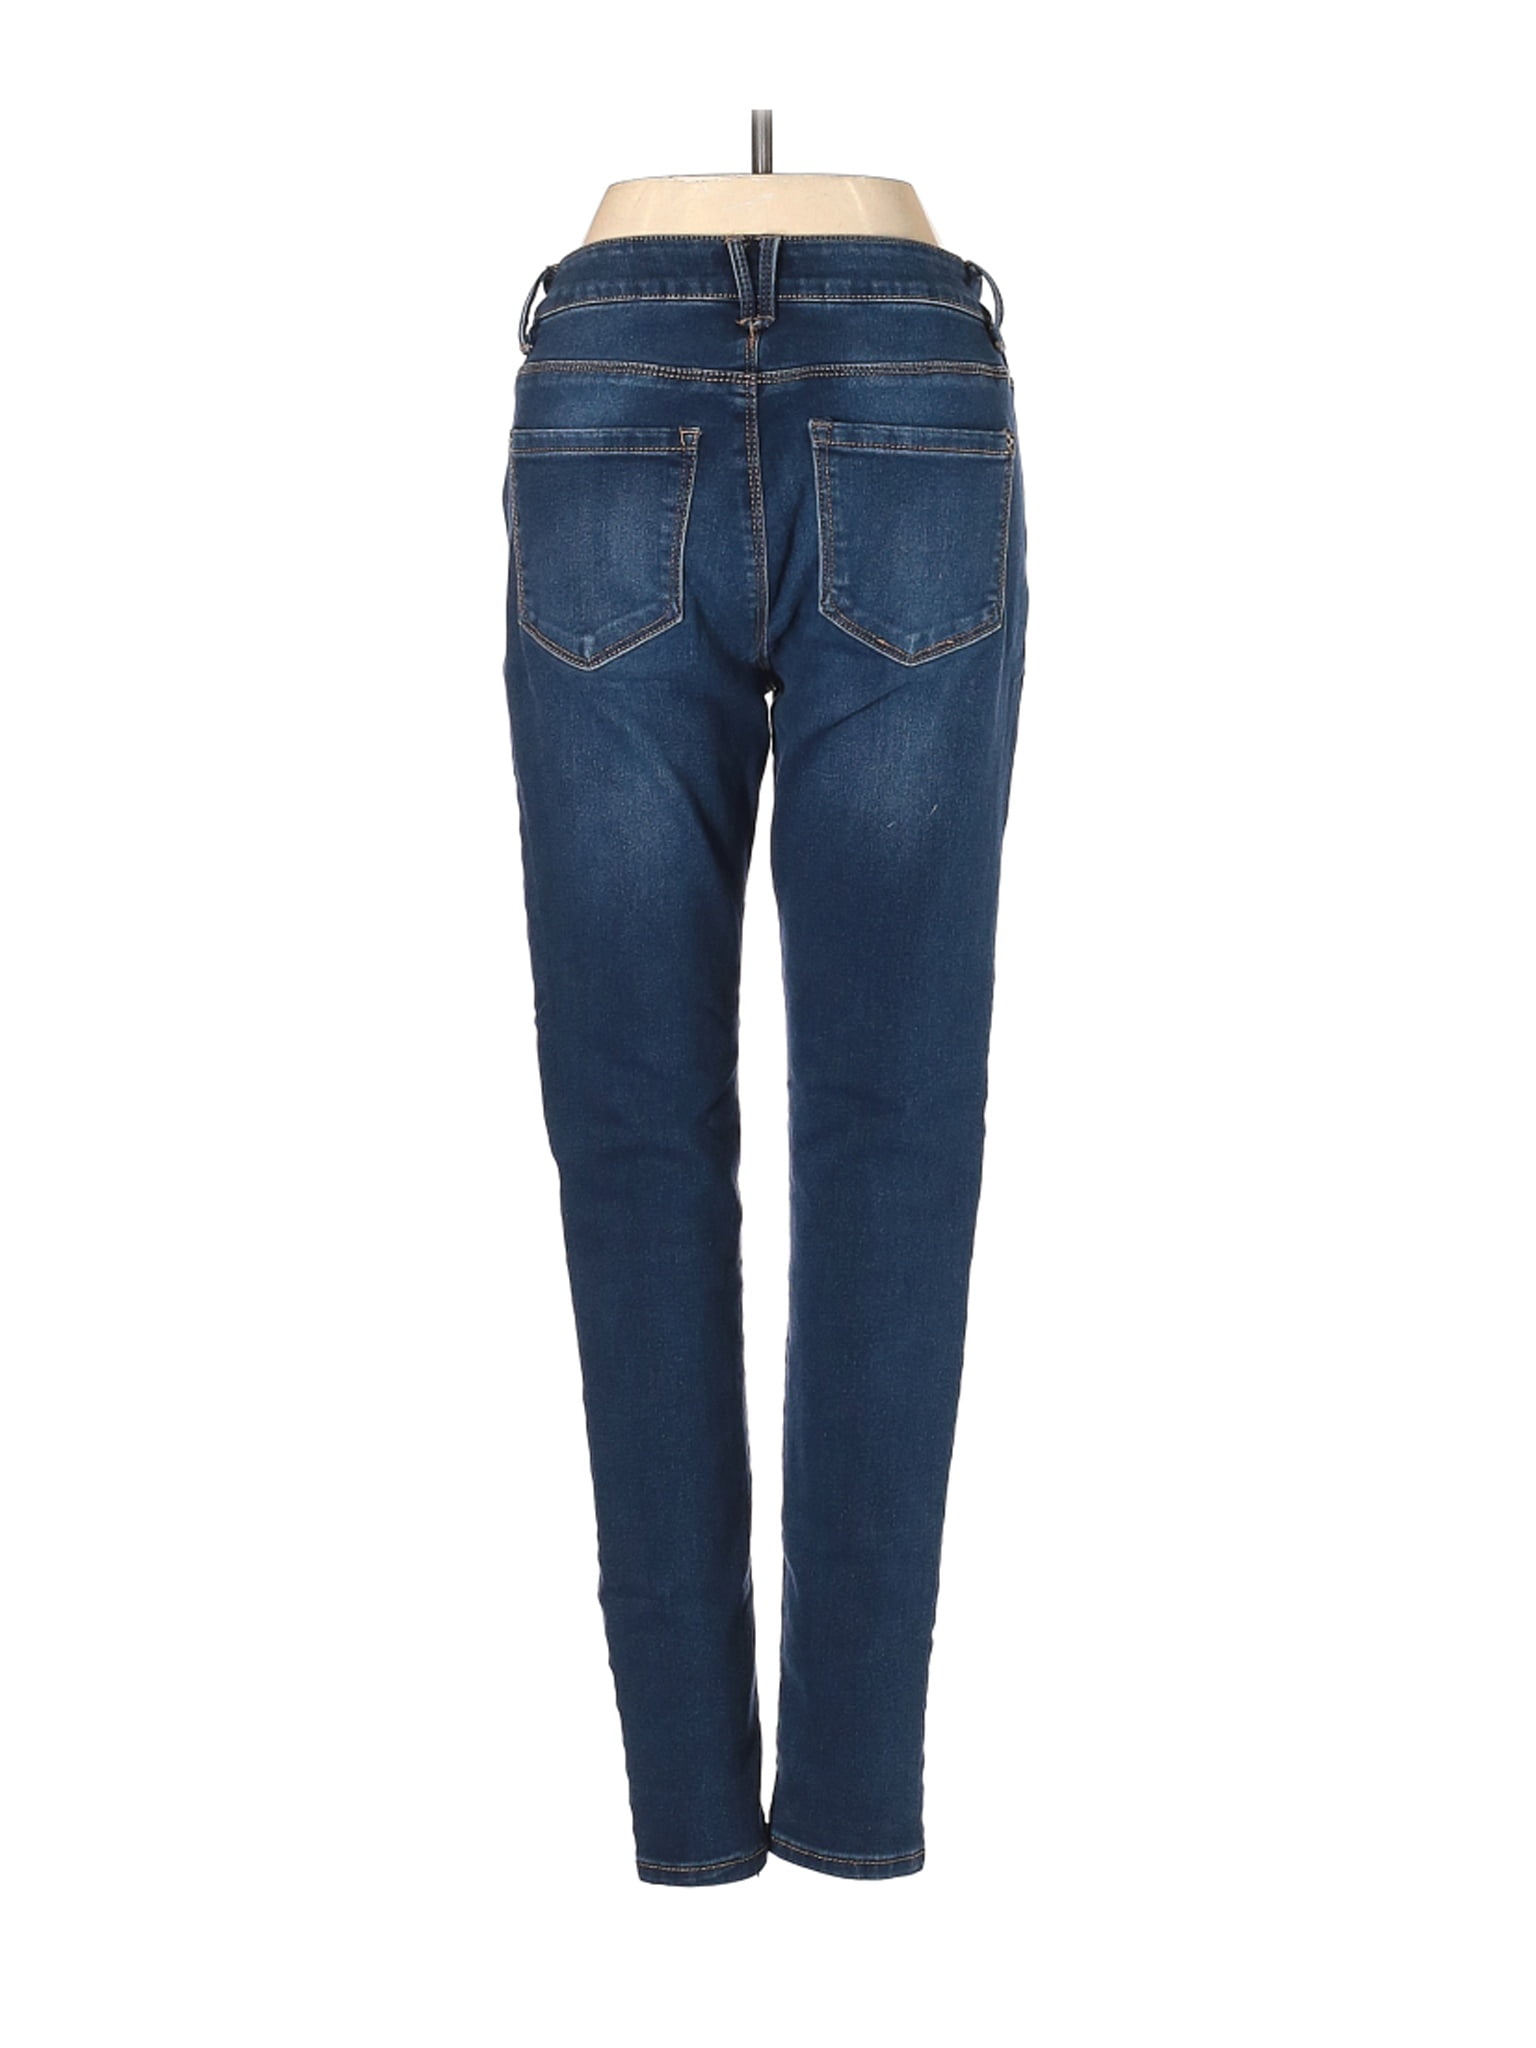 curve appeal jeans